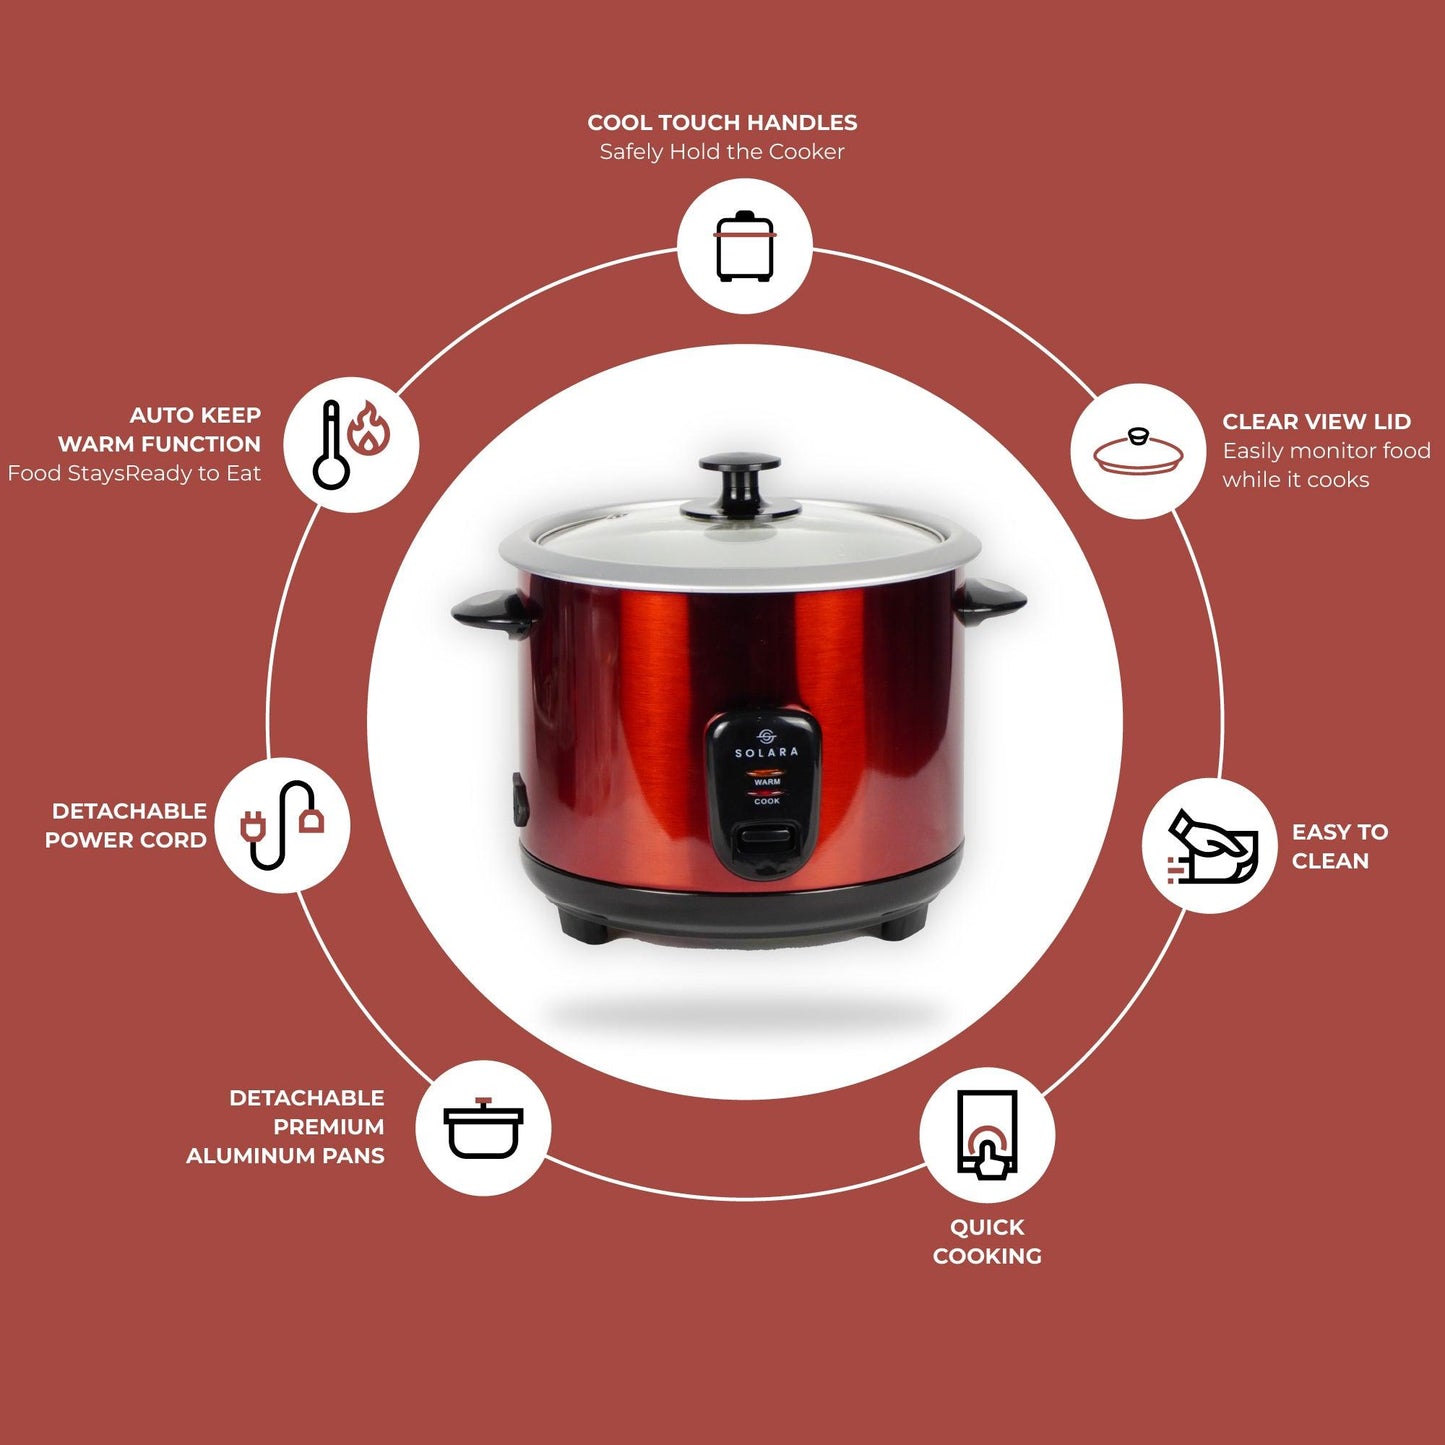 Solara Electric Rice Cooker - One Touch